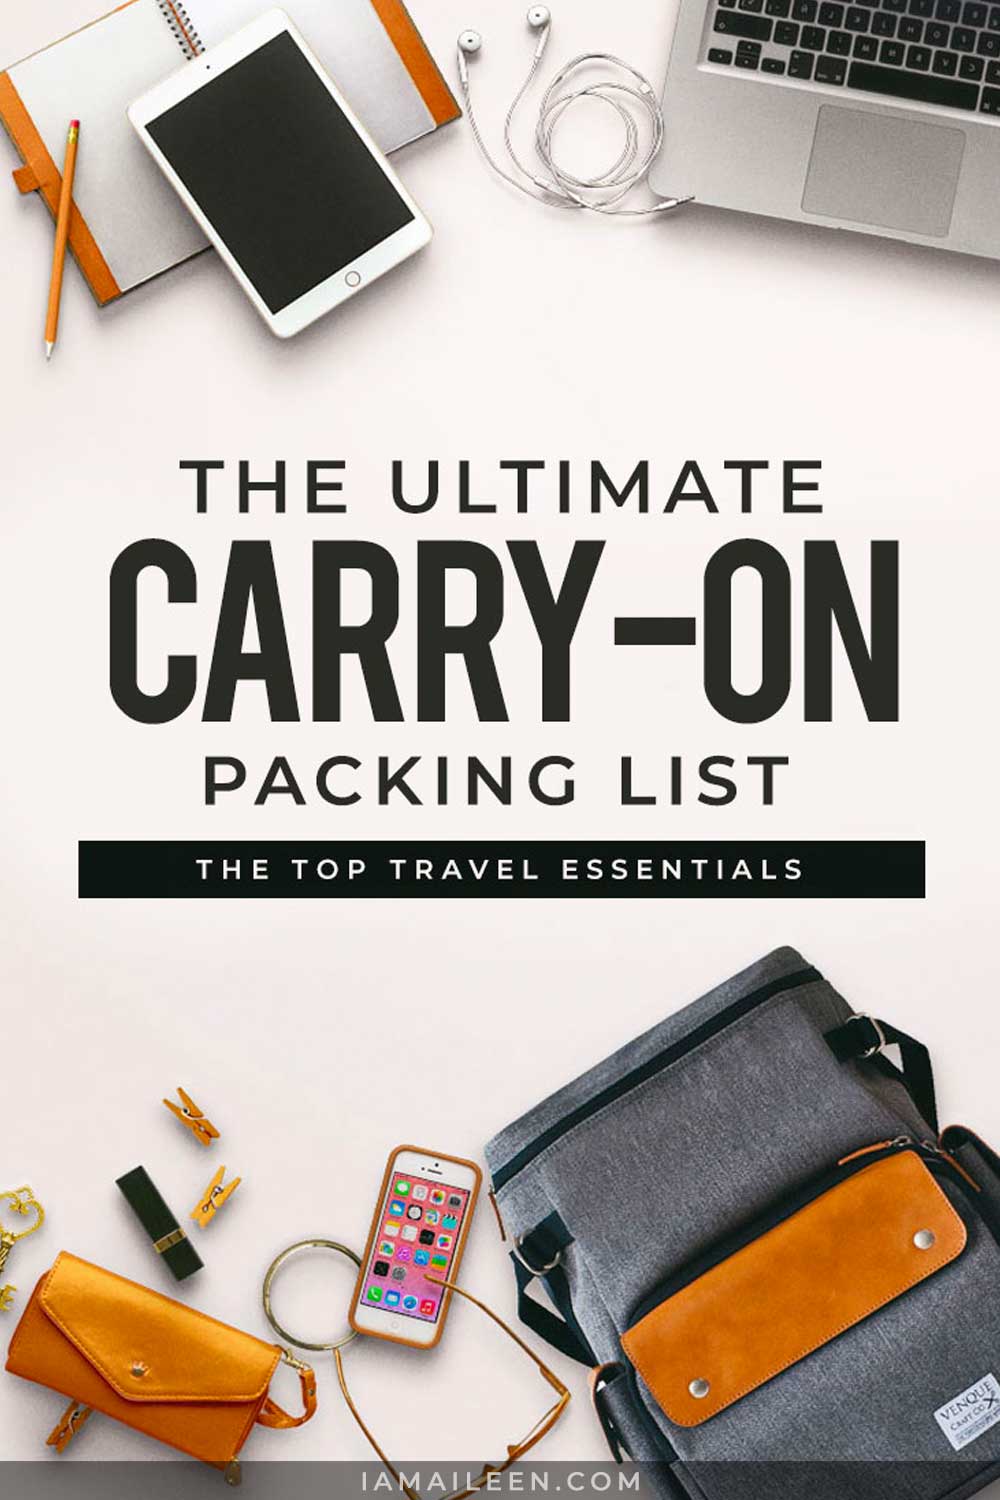 Ultimate Carry On Packing List Guide: The Top Travel Essentials You Need